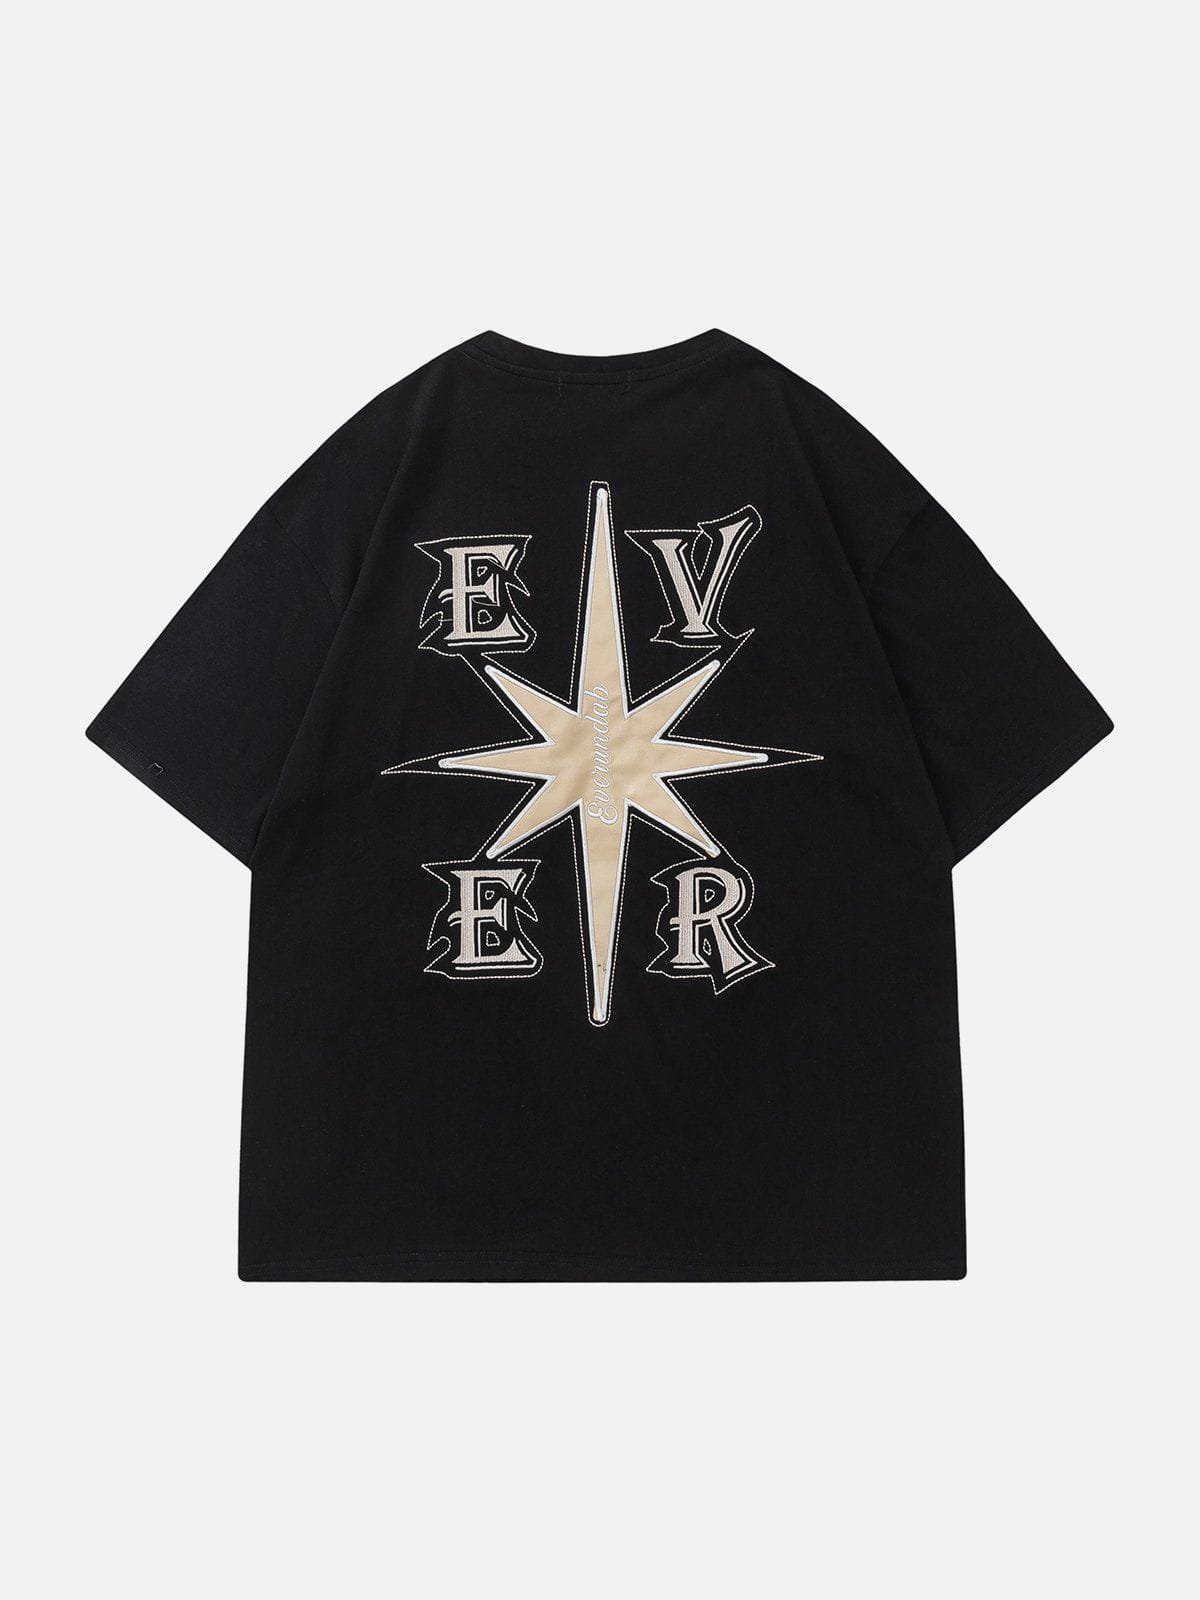 Sneakerland™ - Applique embroidery Star Tee